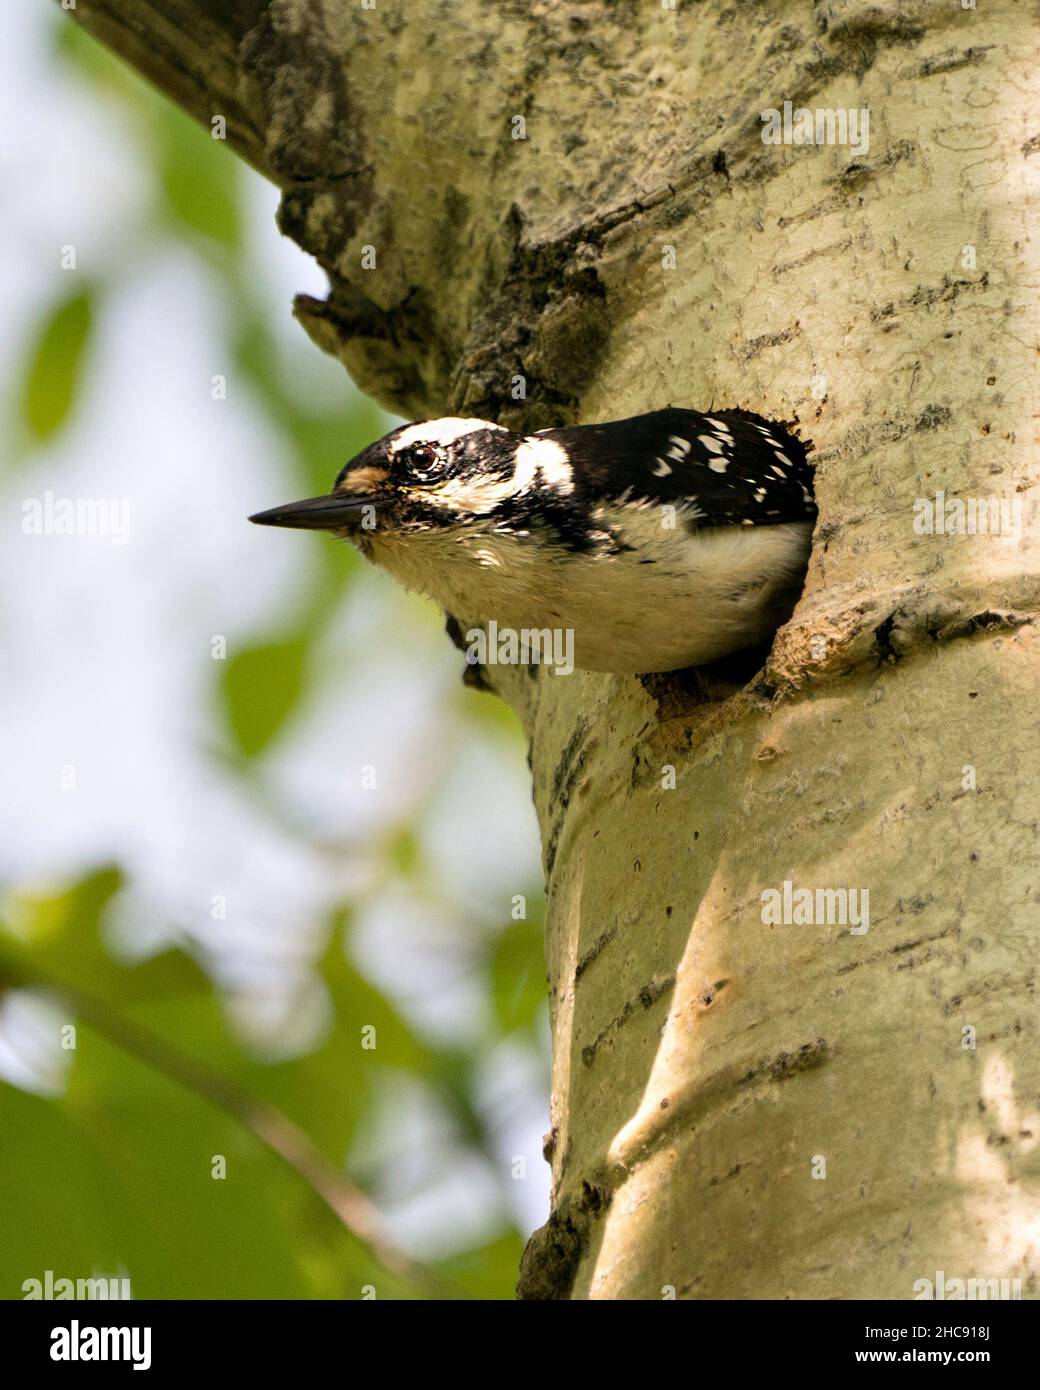 Woodpecker head out of its nest hole home guarding and protecting the nest  in its environment and habitat surrounding. Woodpecker Hairy Image. Stock Photo